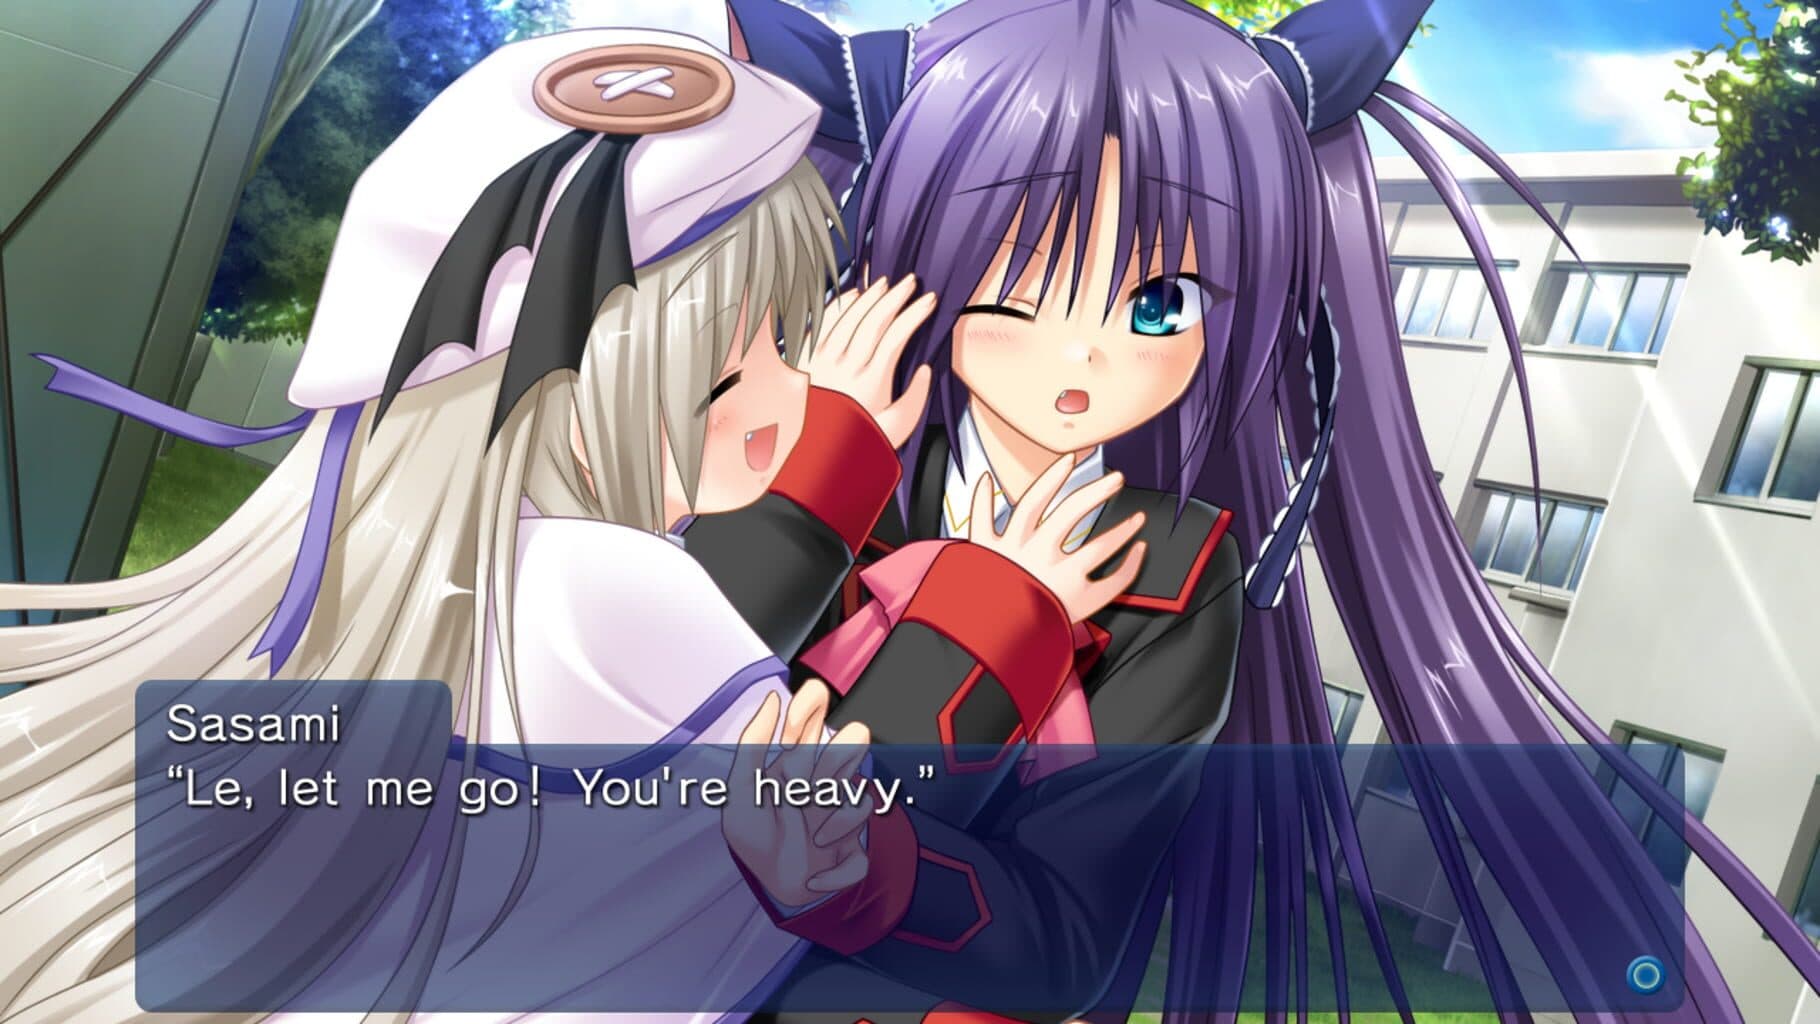 Little Busters! Converted Edition Image